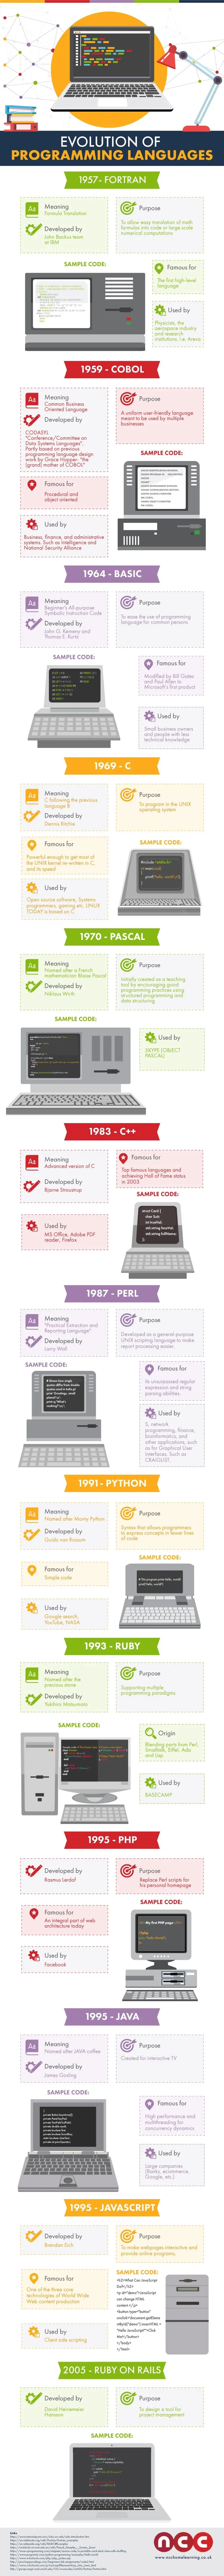 The Evolution of Computer Language - #Infographic